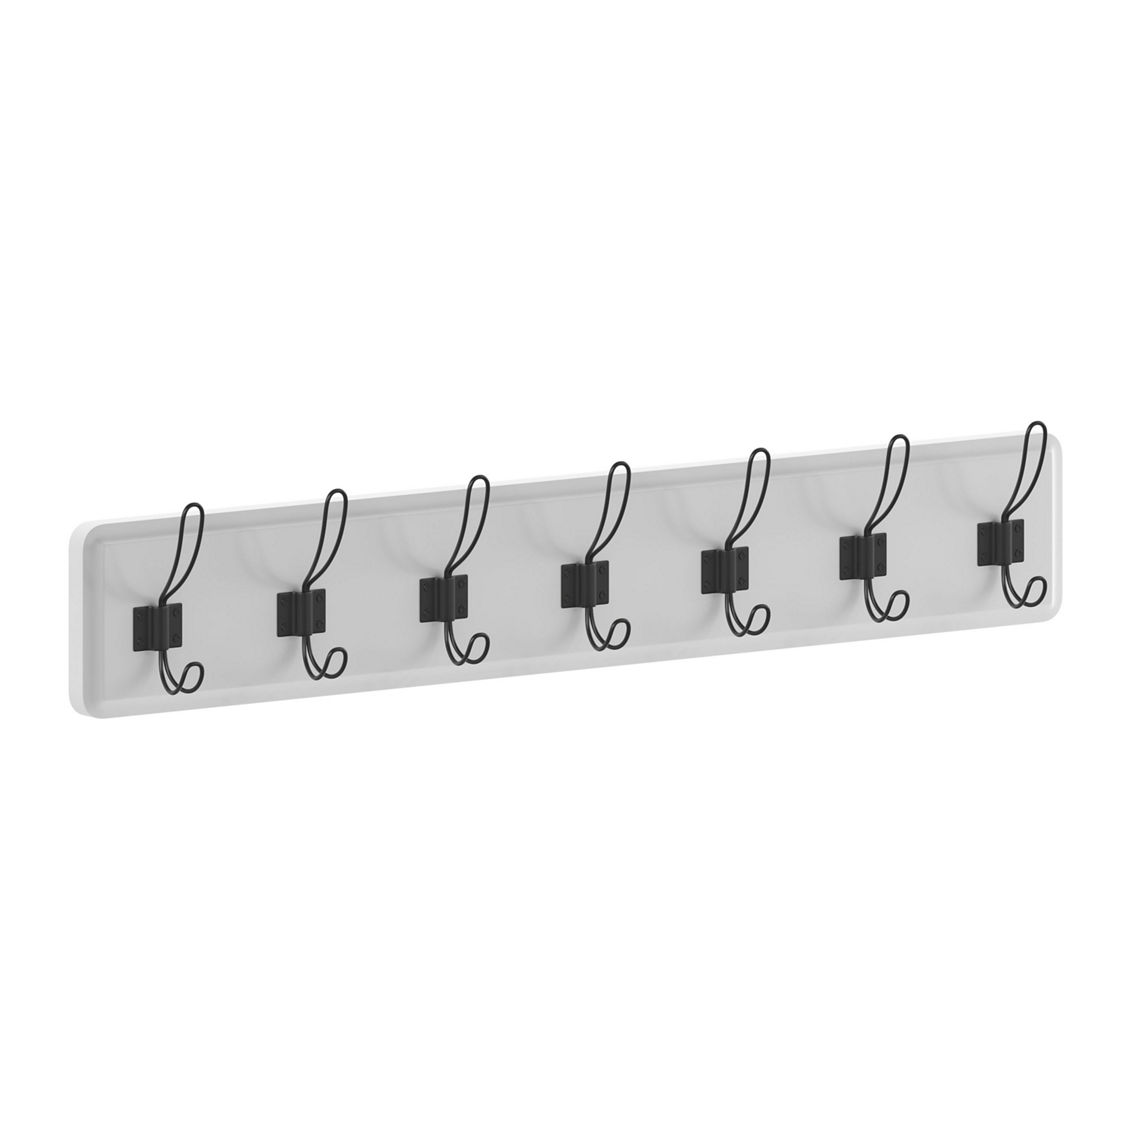 Flash Furniture Wall Mount Storage Rack with 7 Hooks - Image 4 of 5